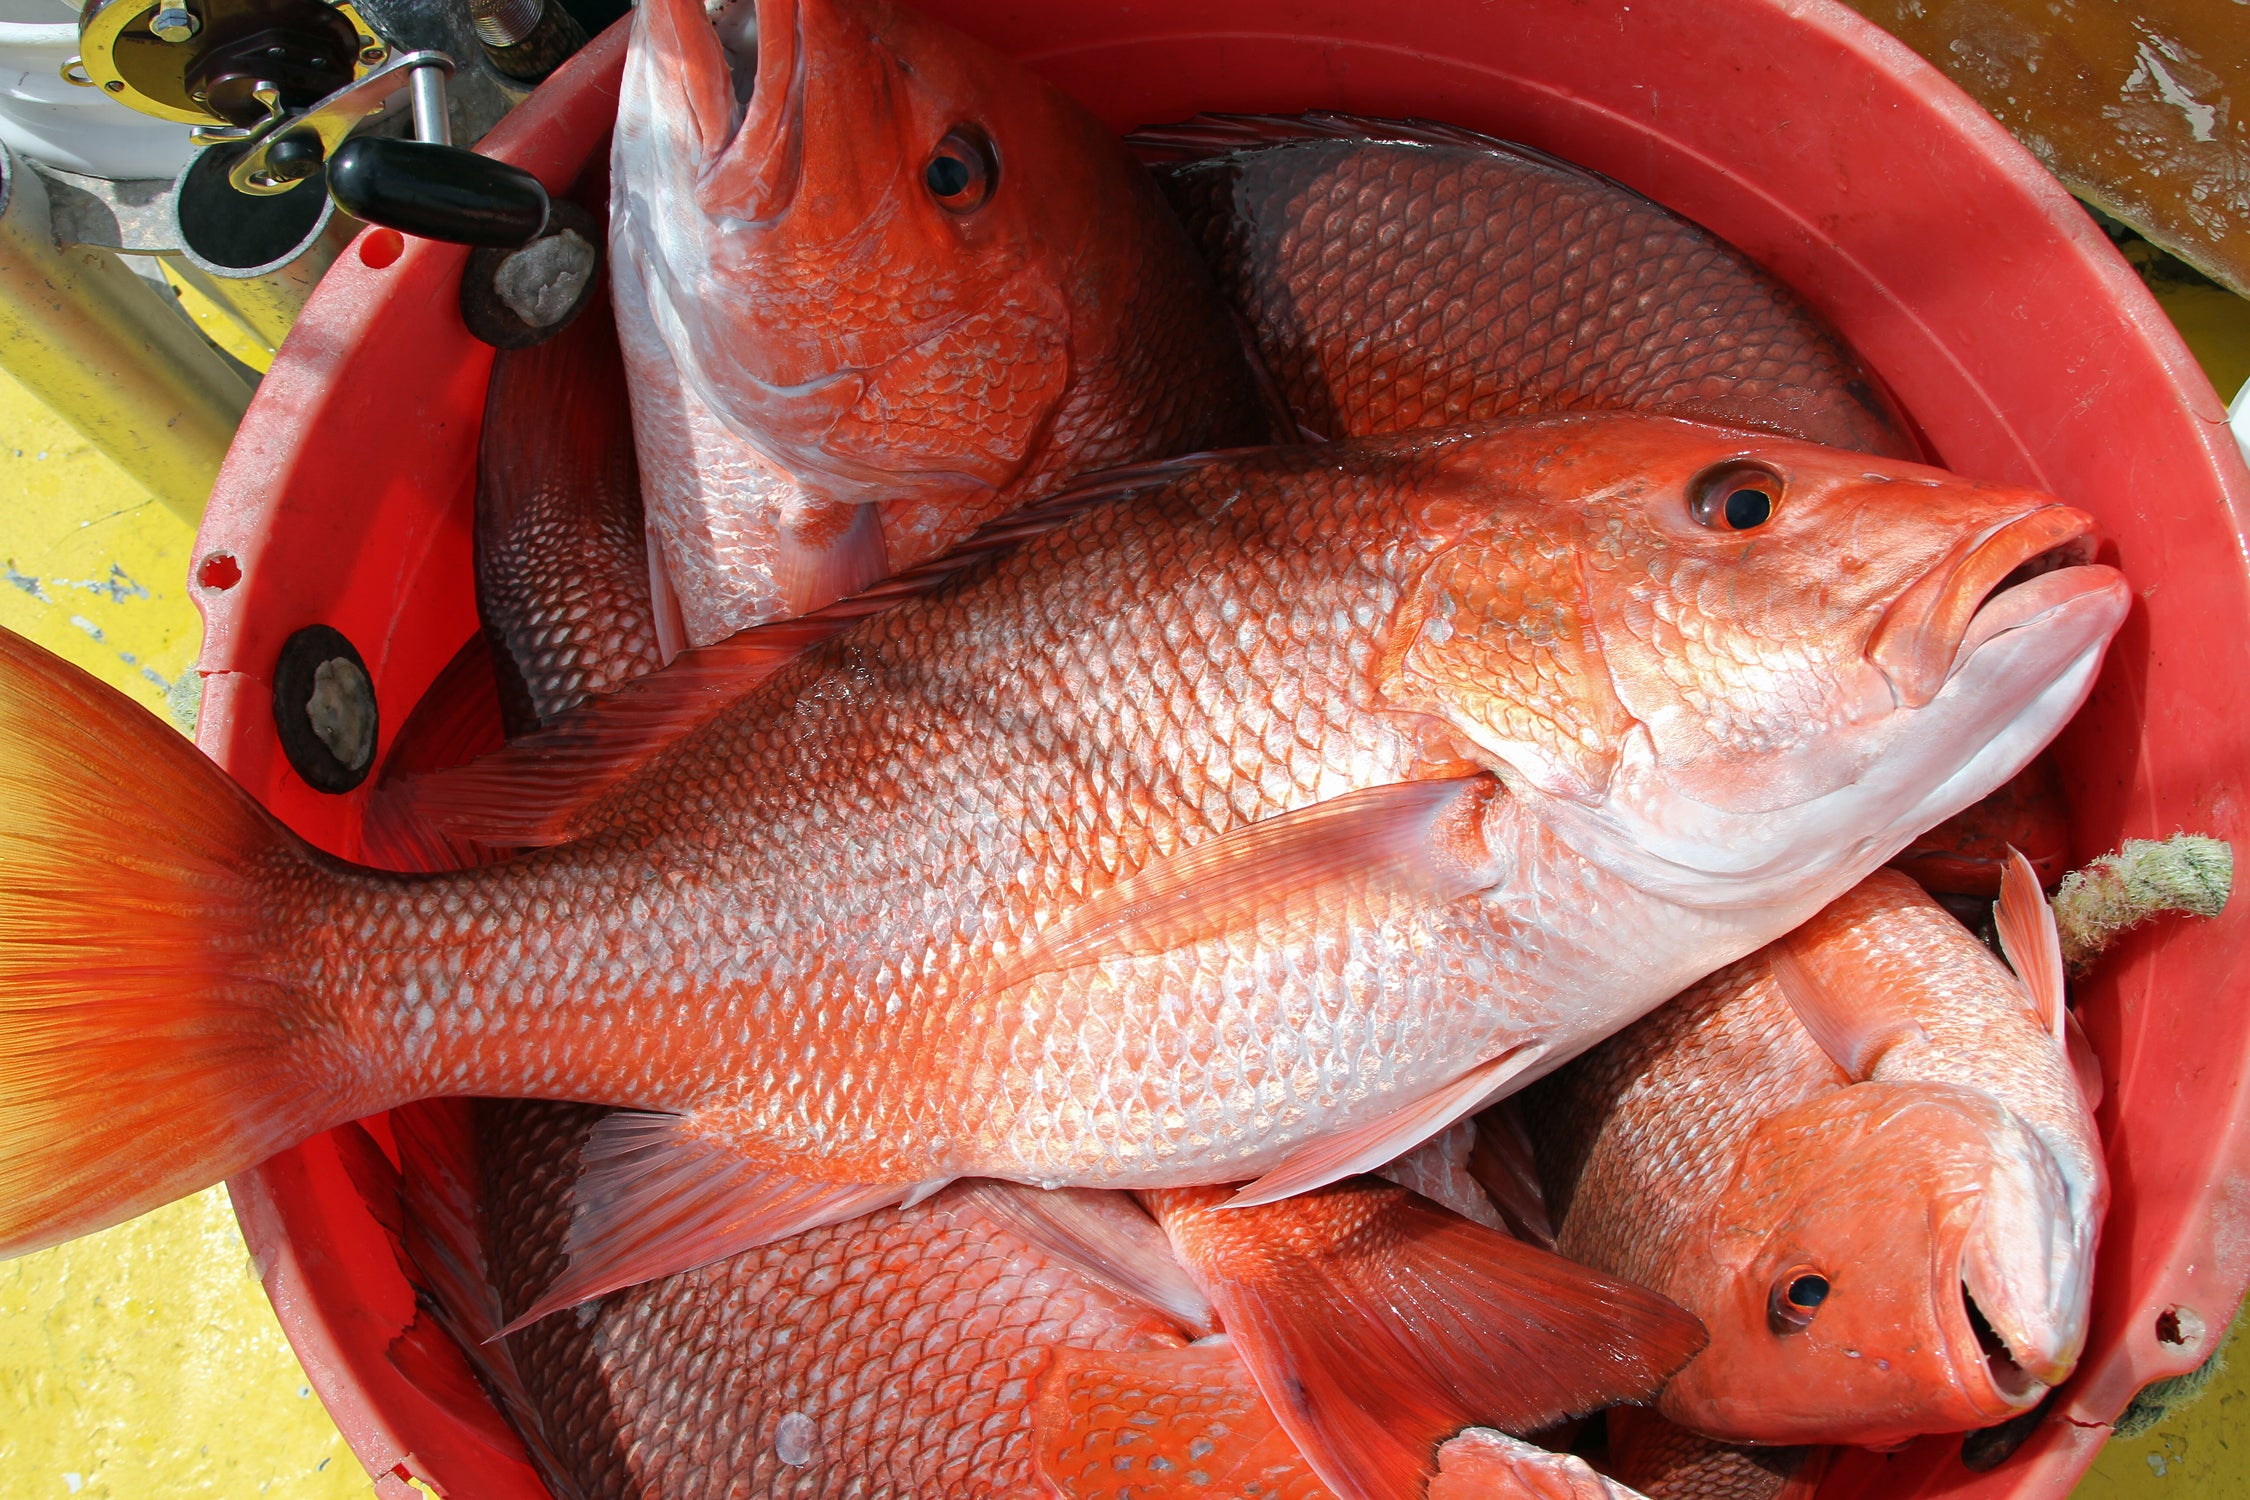 Alabama Adds Three-Day Red Snapper Season for Private Anglers in October